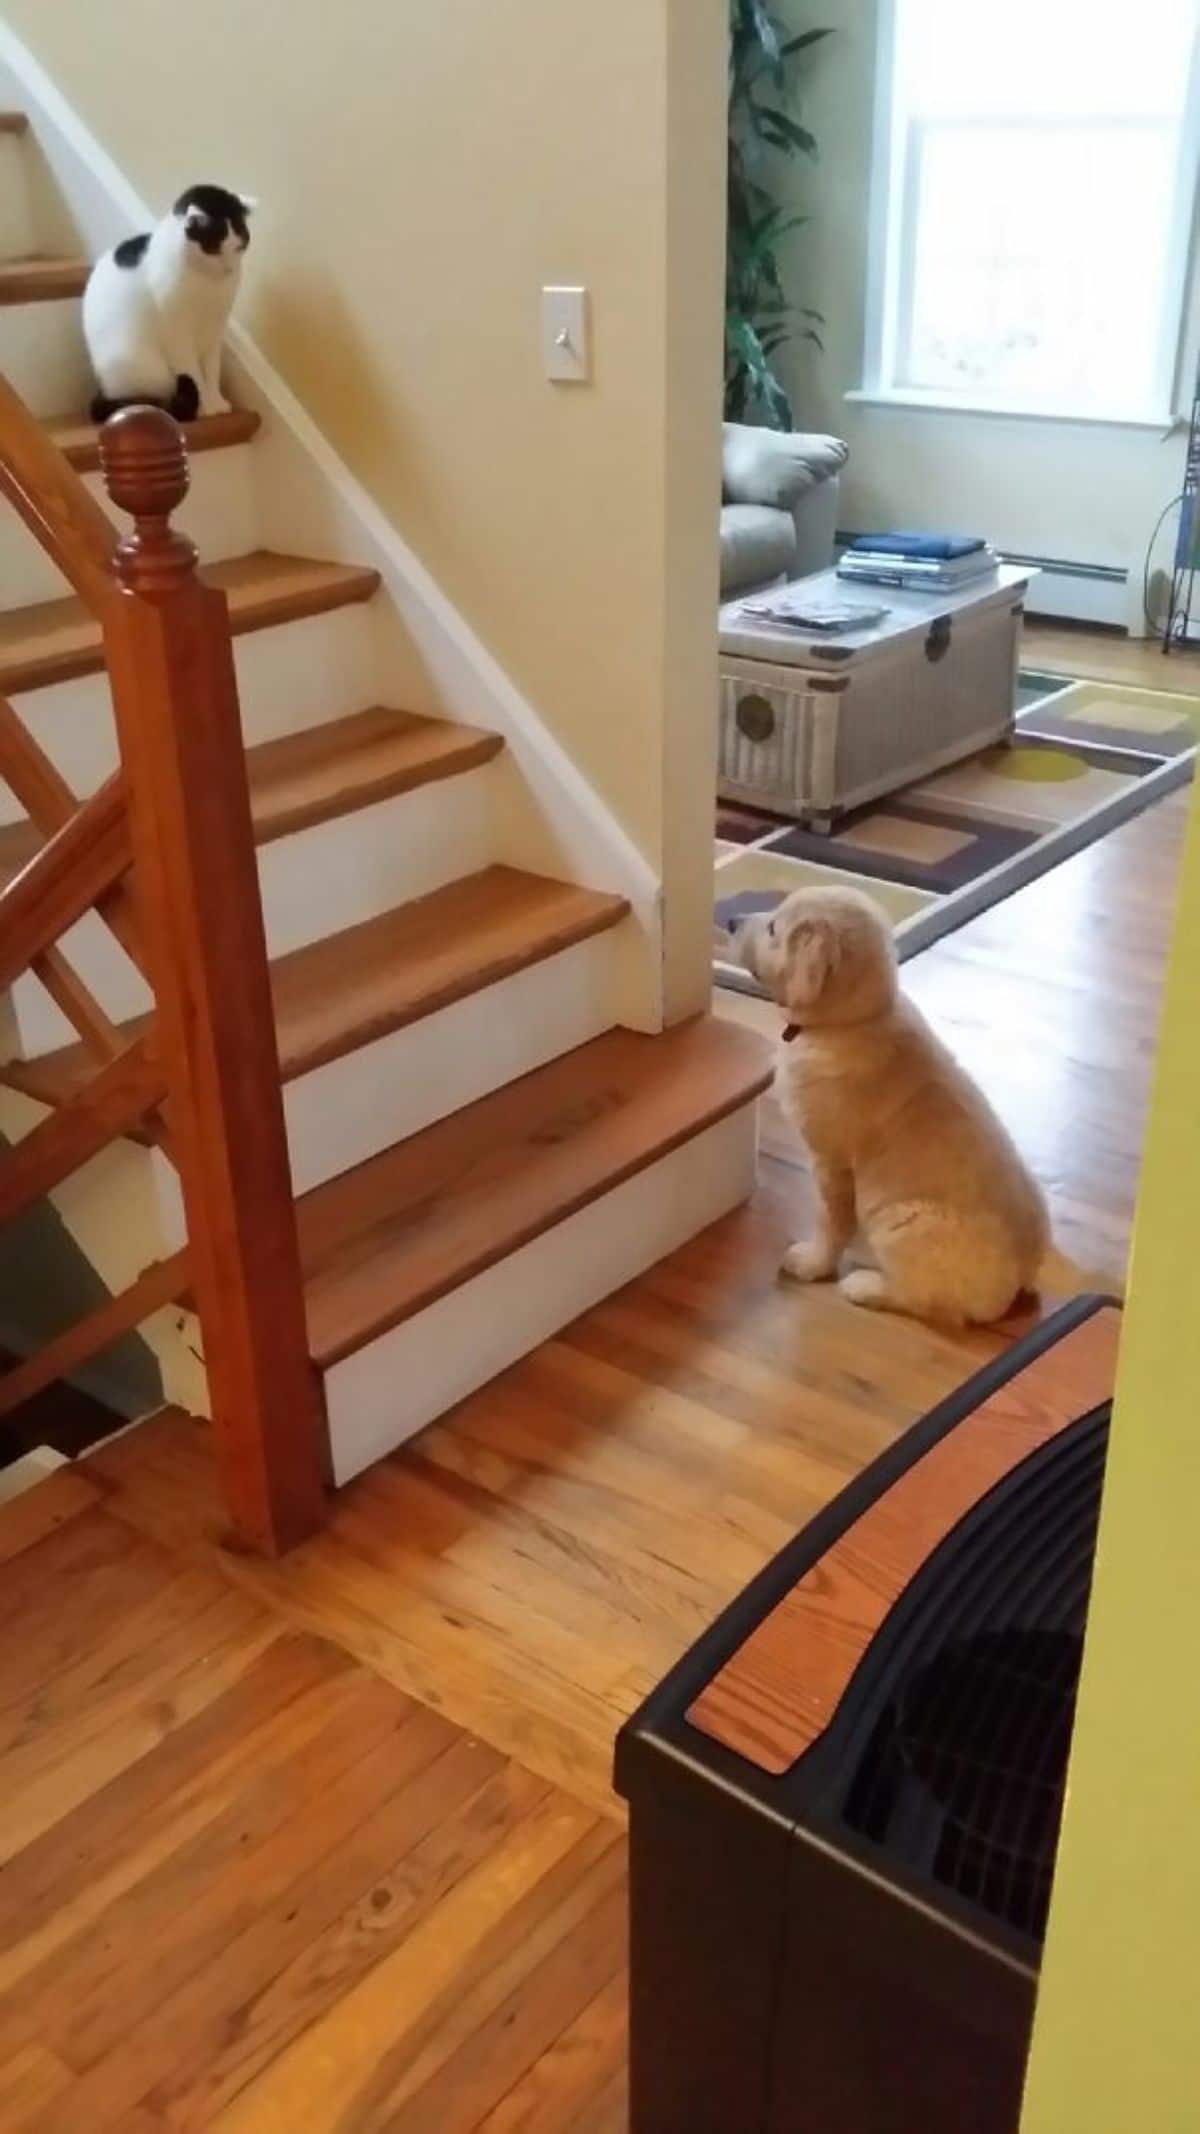 black and white cat sitting on the stairs and staring at a golden retriever puppy at the bottom of the stairs